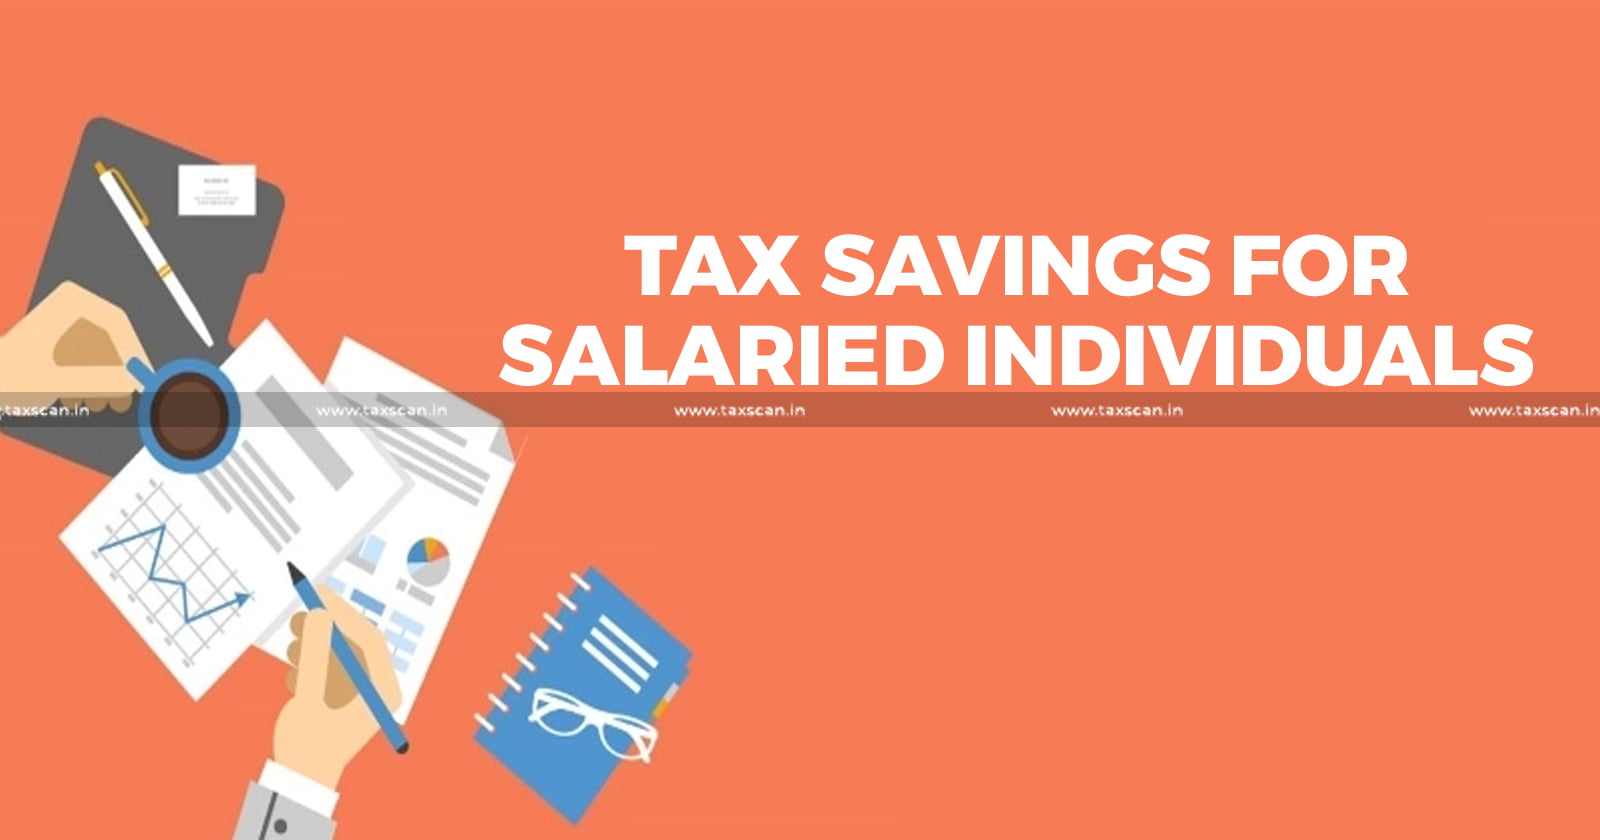 Tax Planning Complete Guide for Tax Savings for Salaried